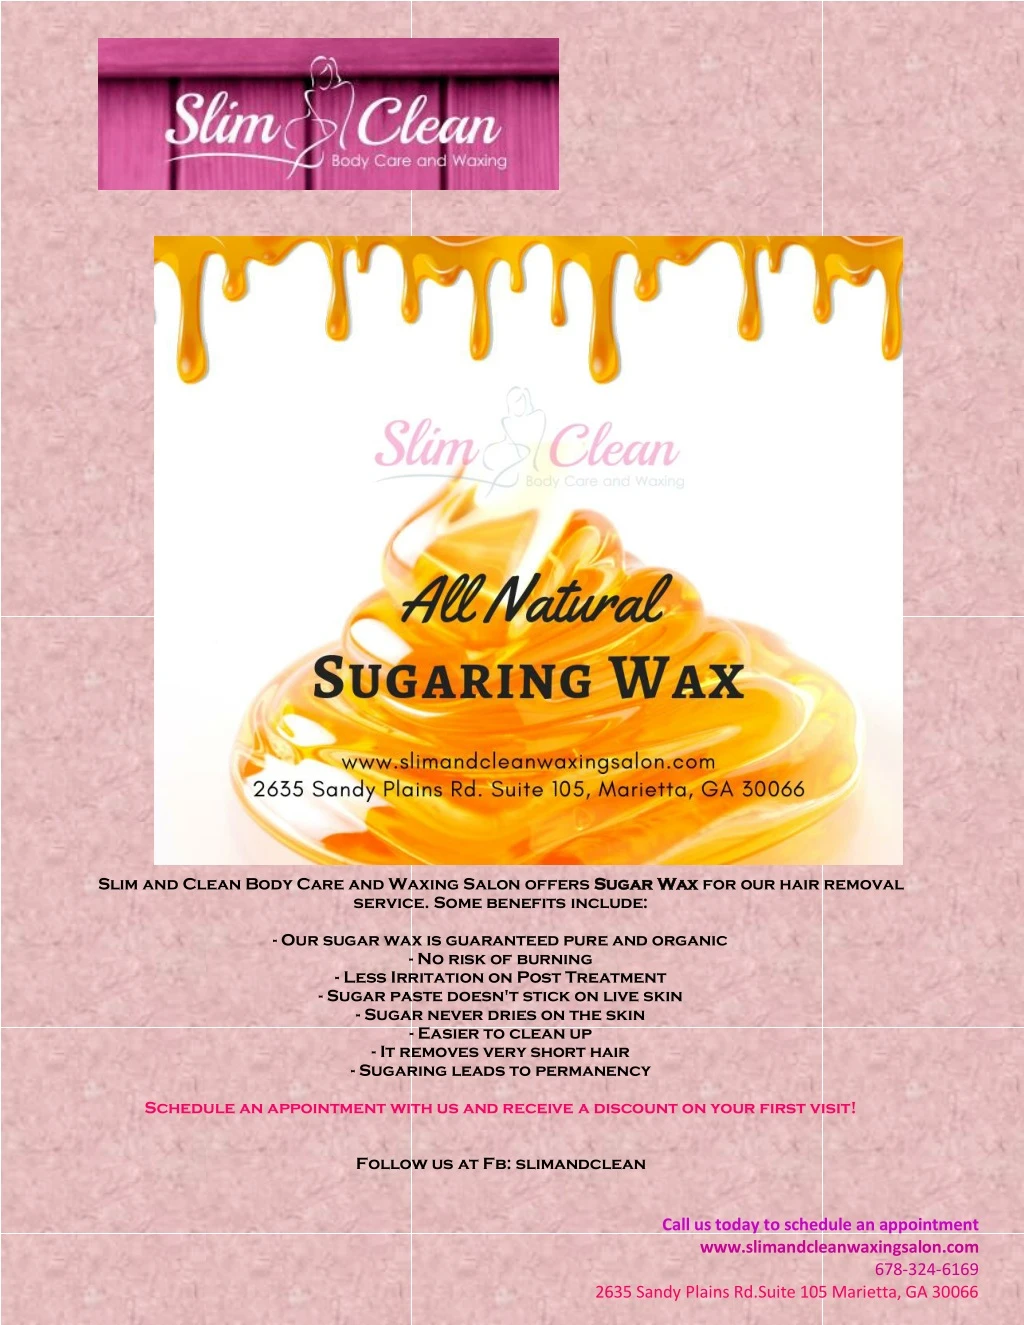 slim and clean body care and waxing salon offers